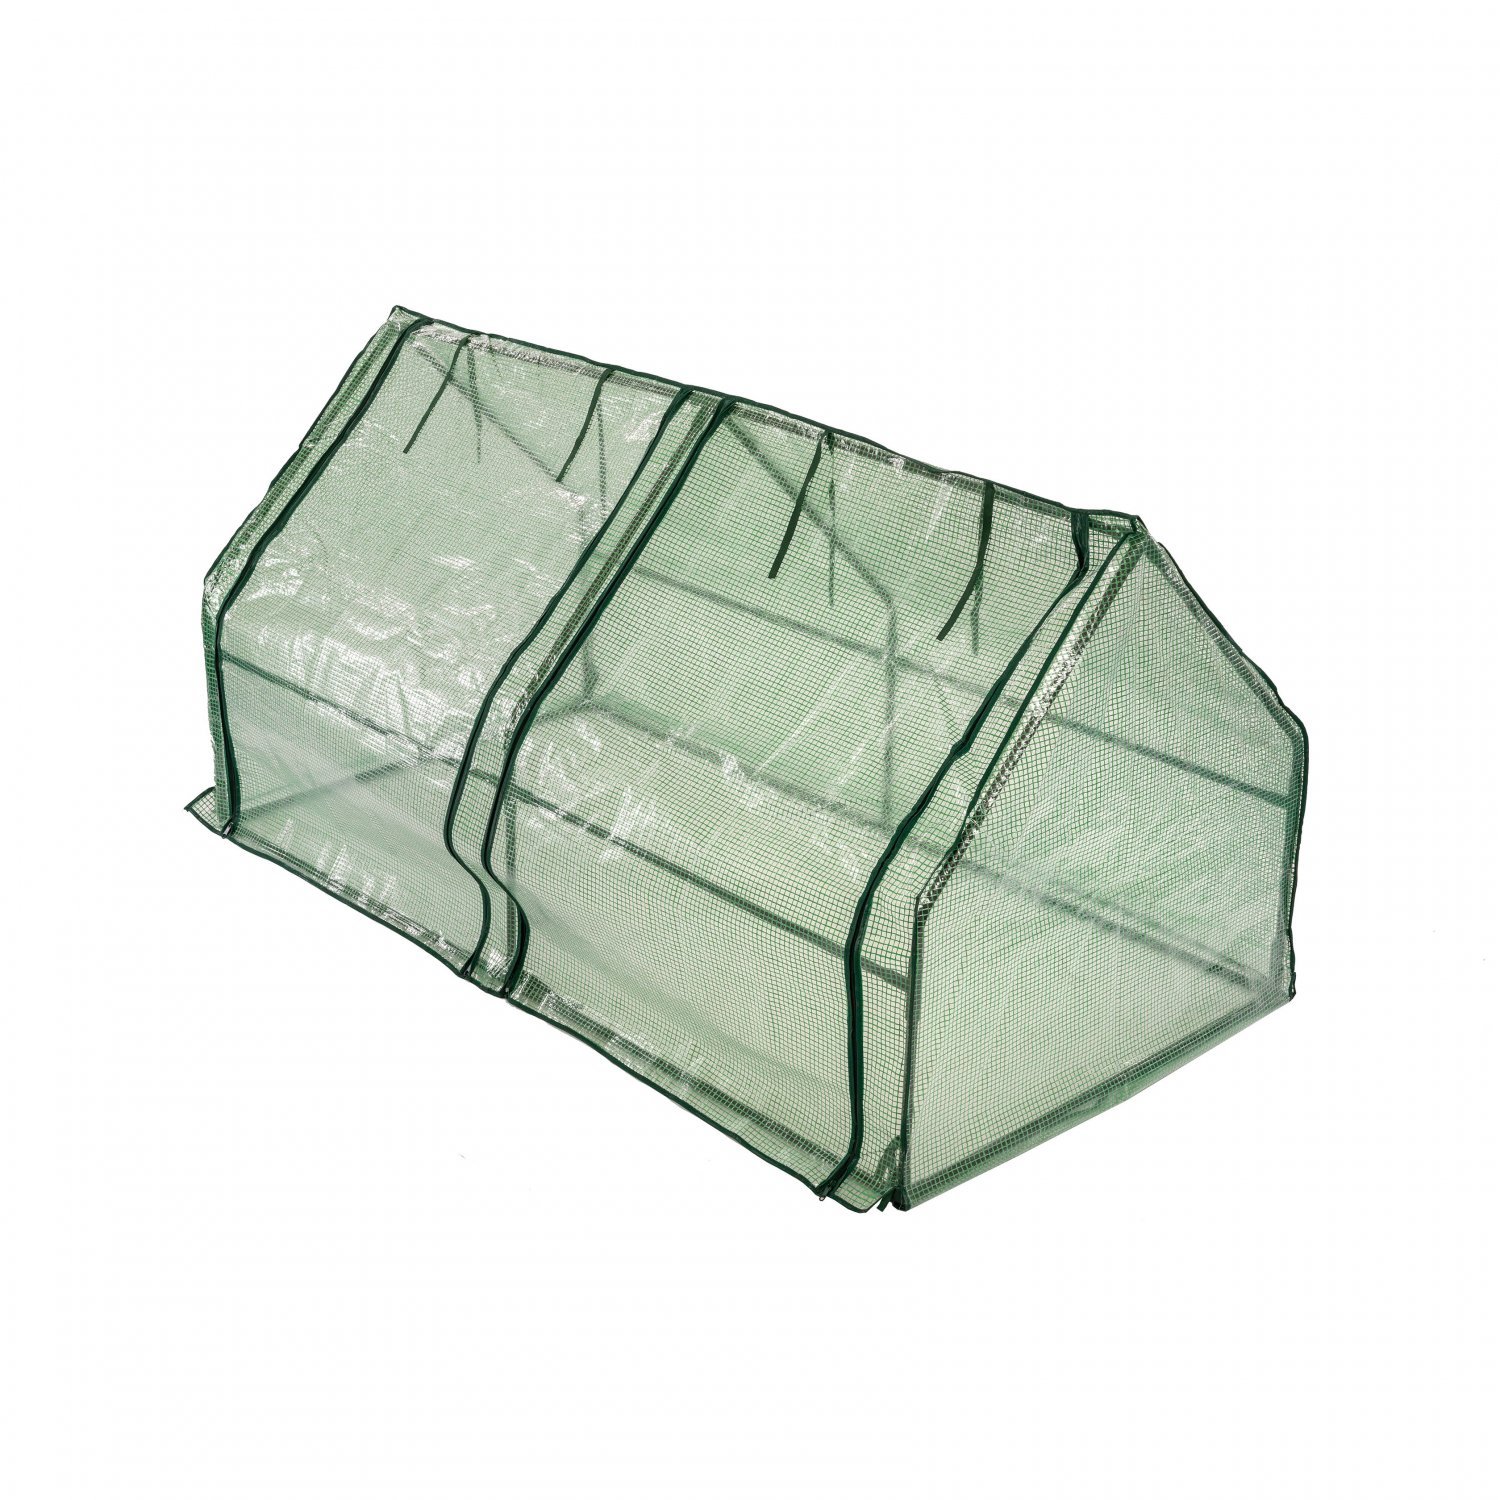 Small Steeple Growhouse Garden Plant Greenhouse with Plastic Mesh Cover - Click Image to Close